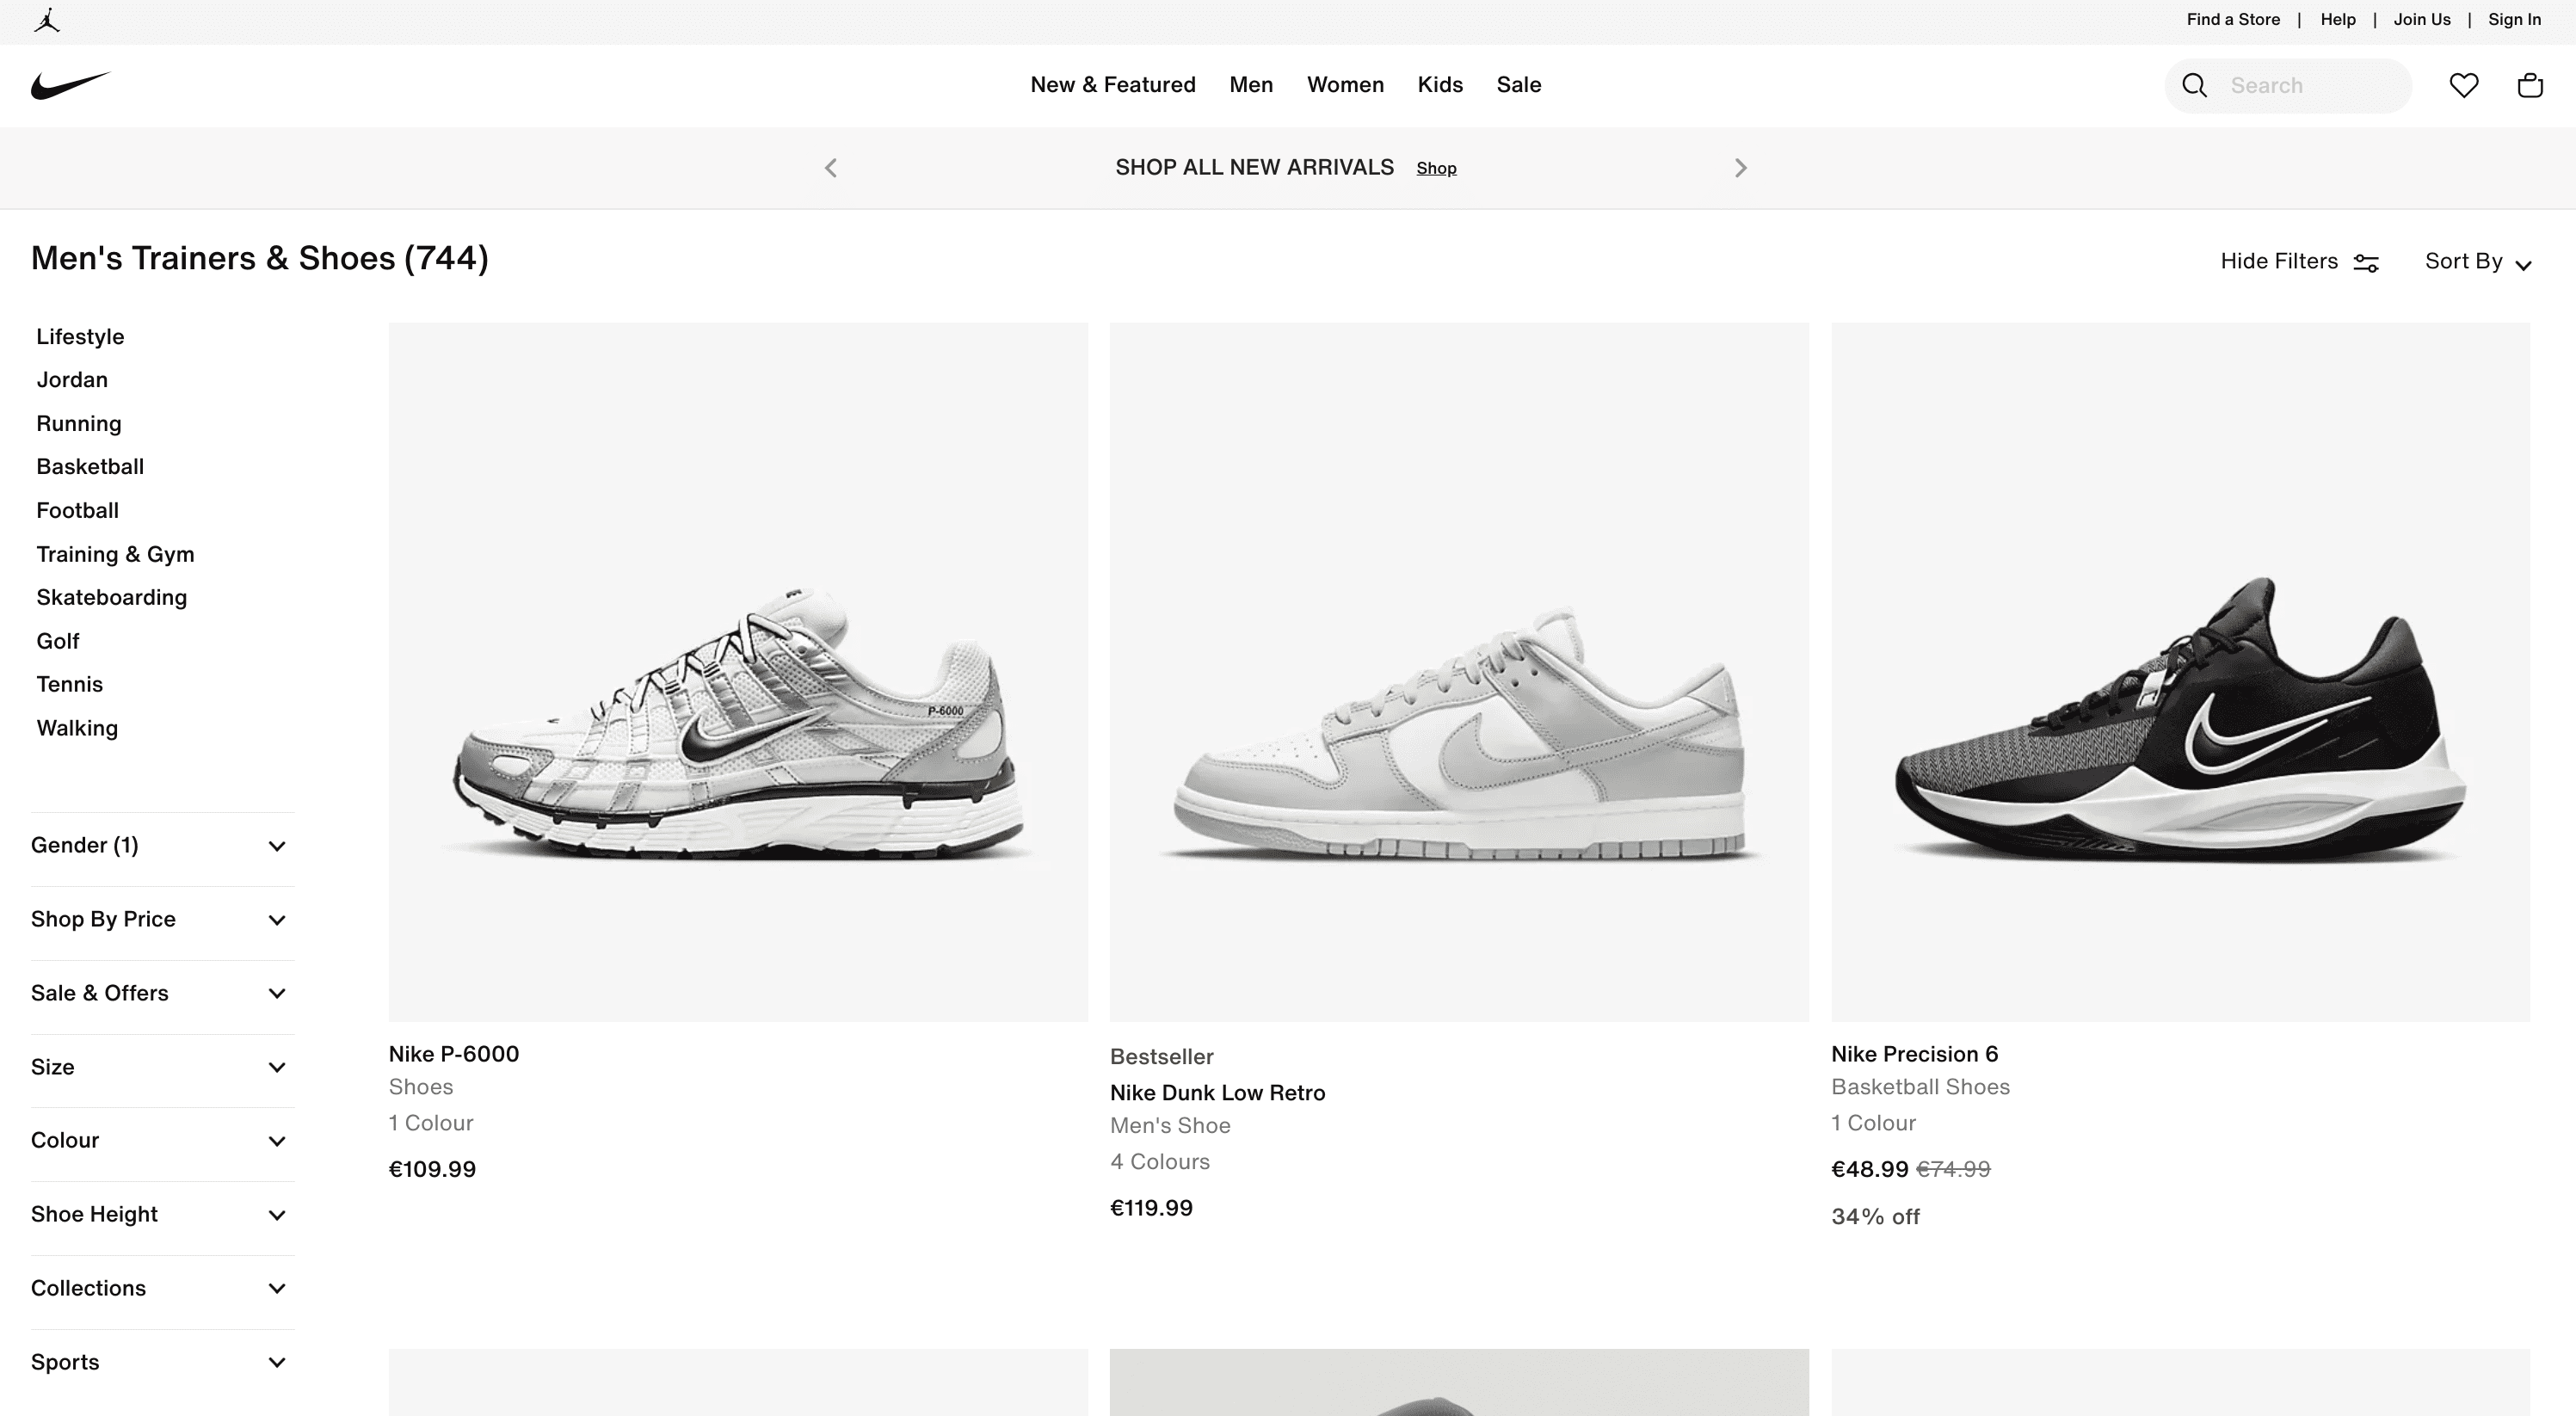 Using Playwright Python to scrape Nike products